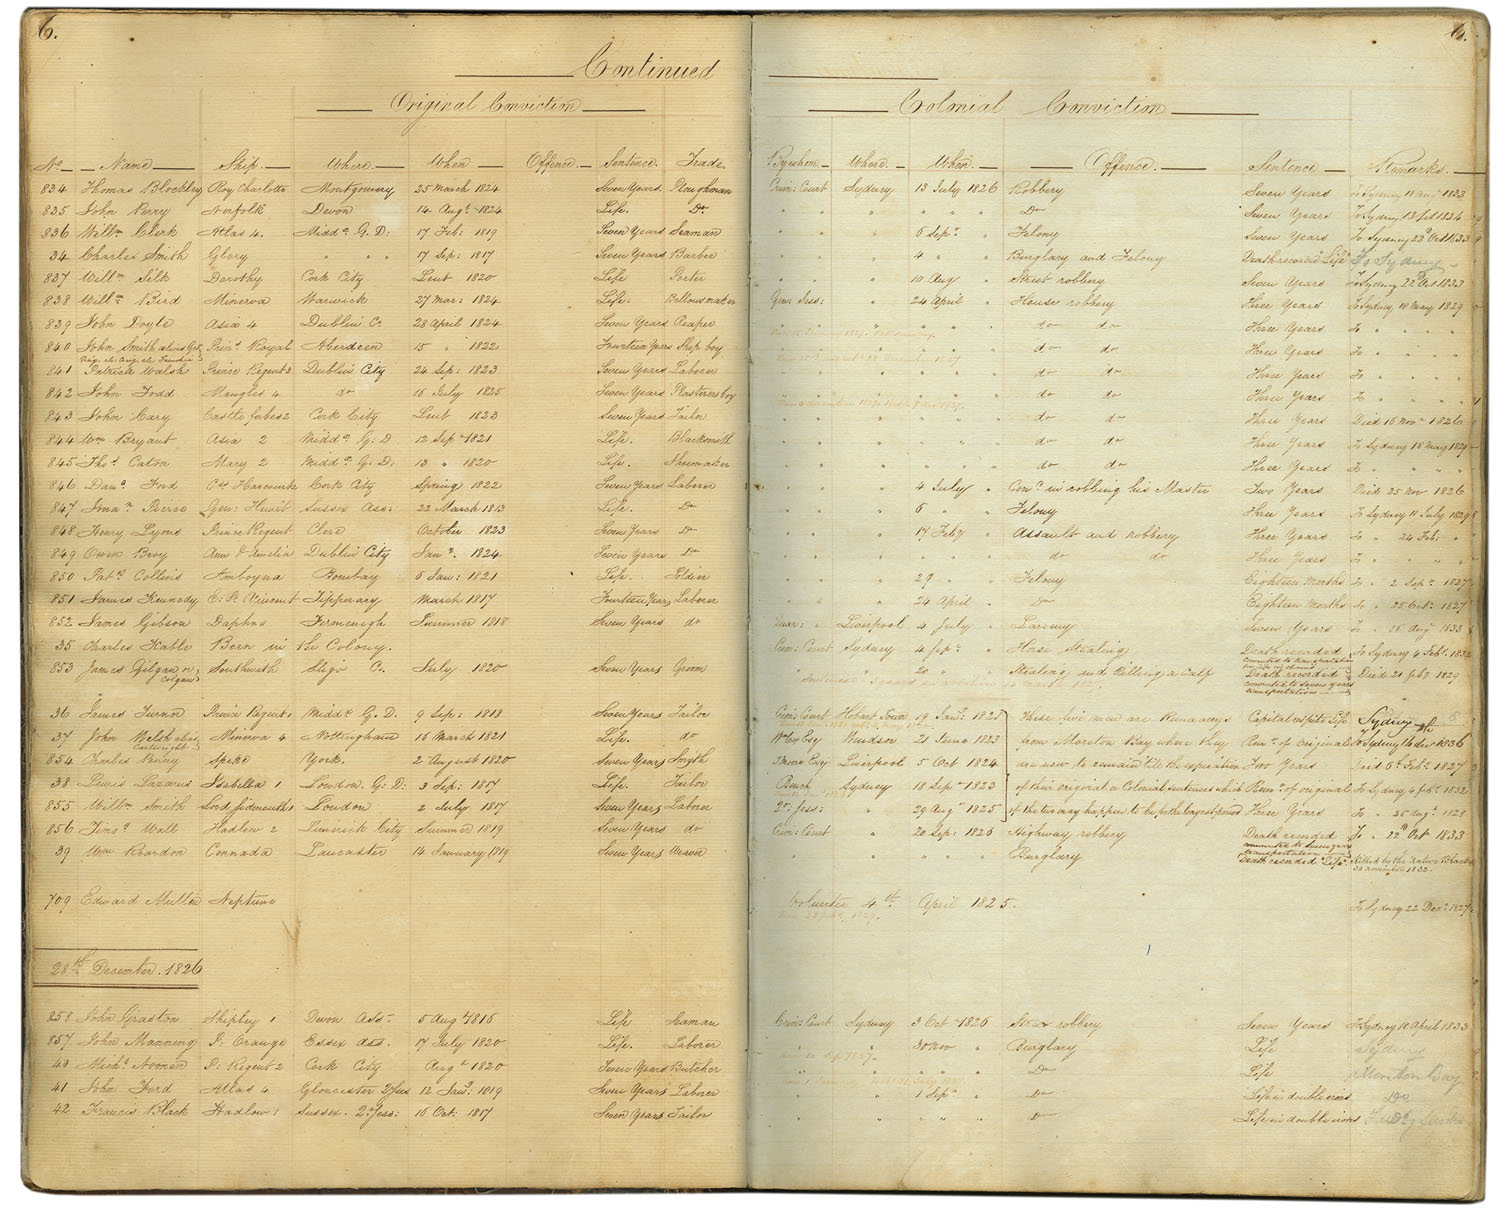 Extract from the chronological register of convicts at Moreton Bay Penal Settlement.